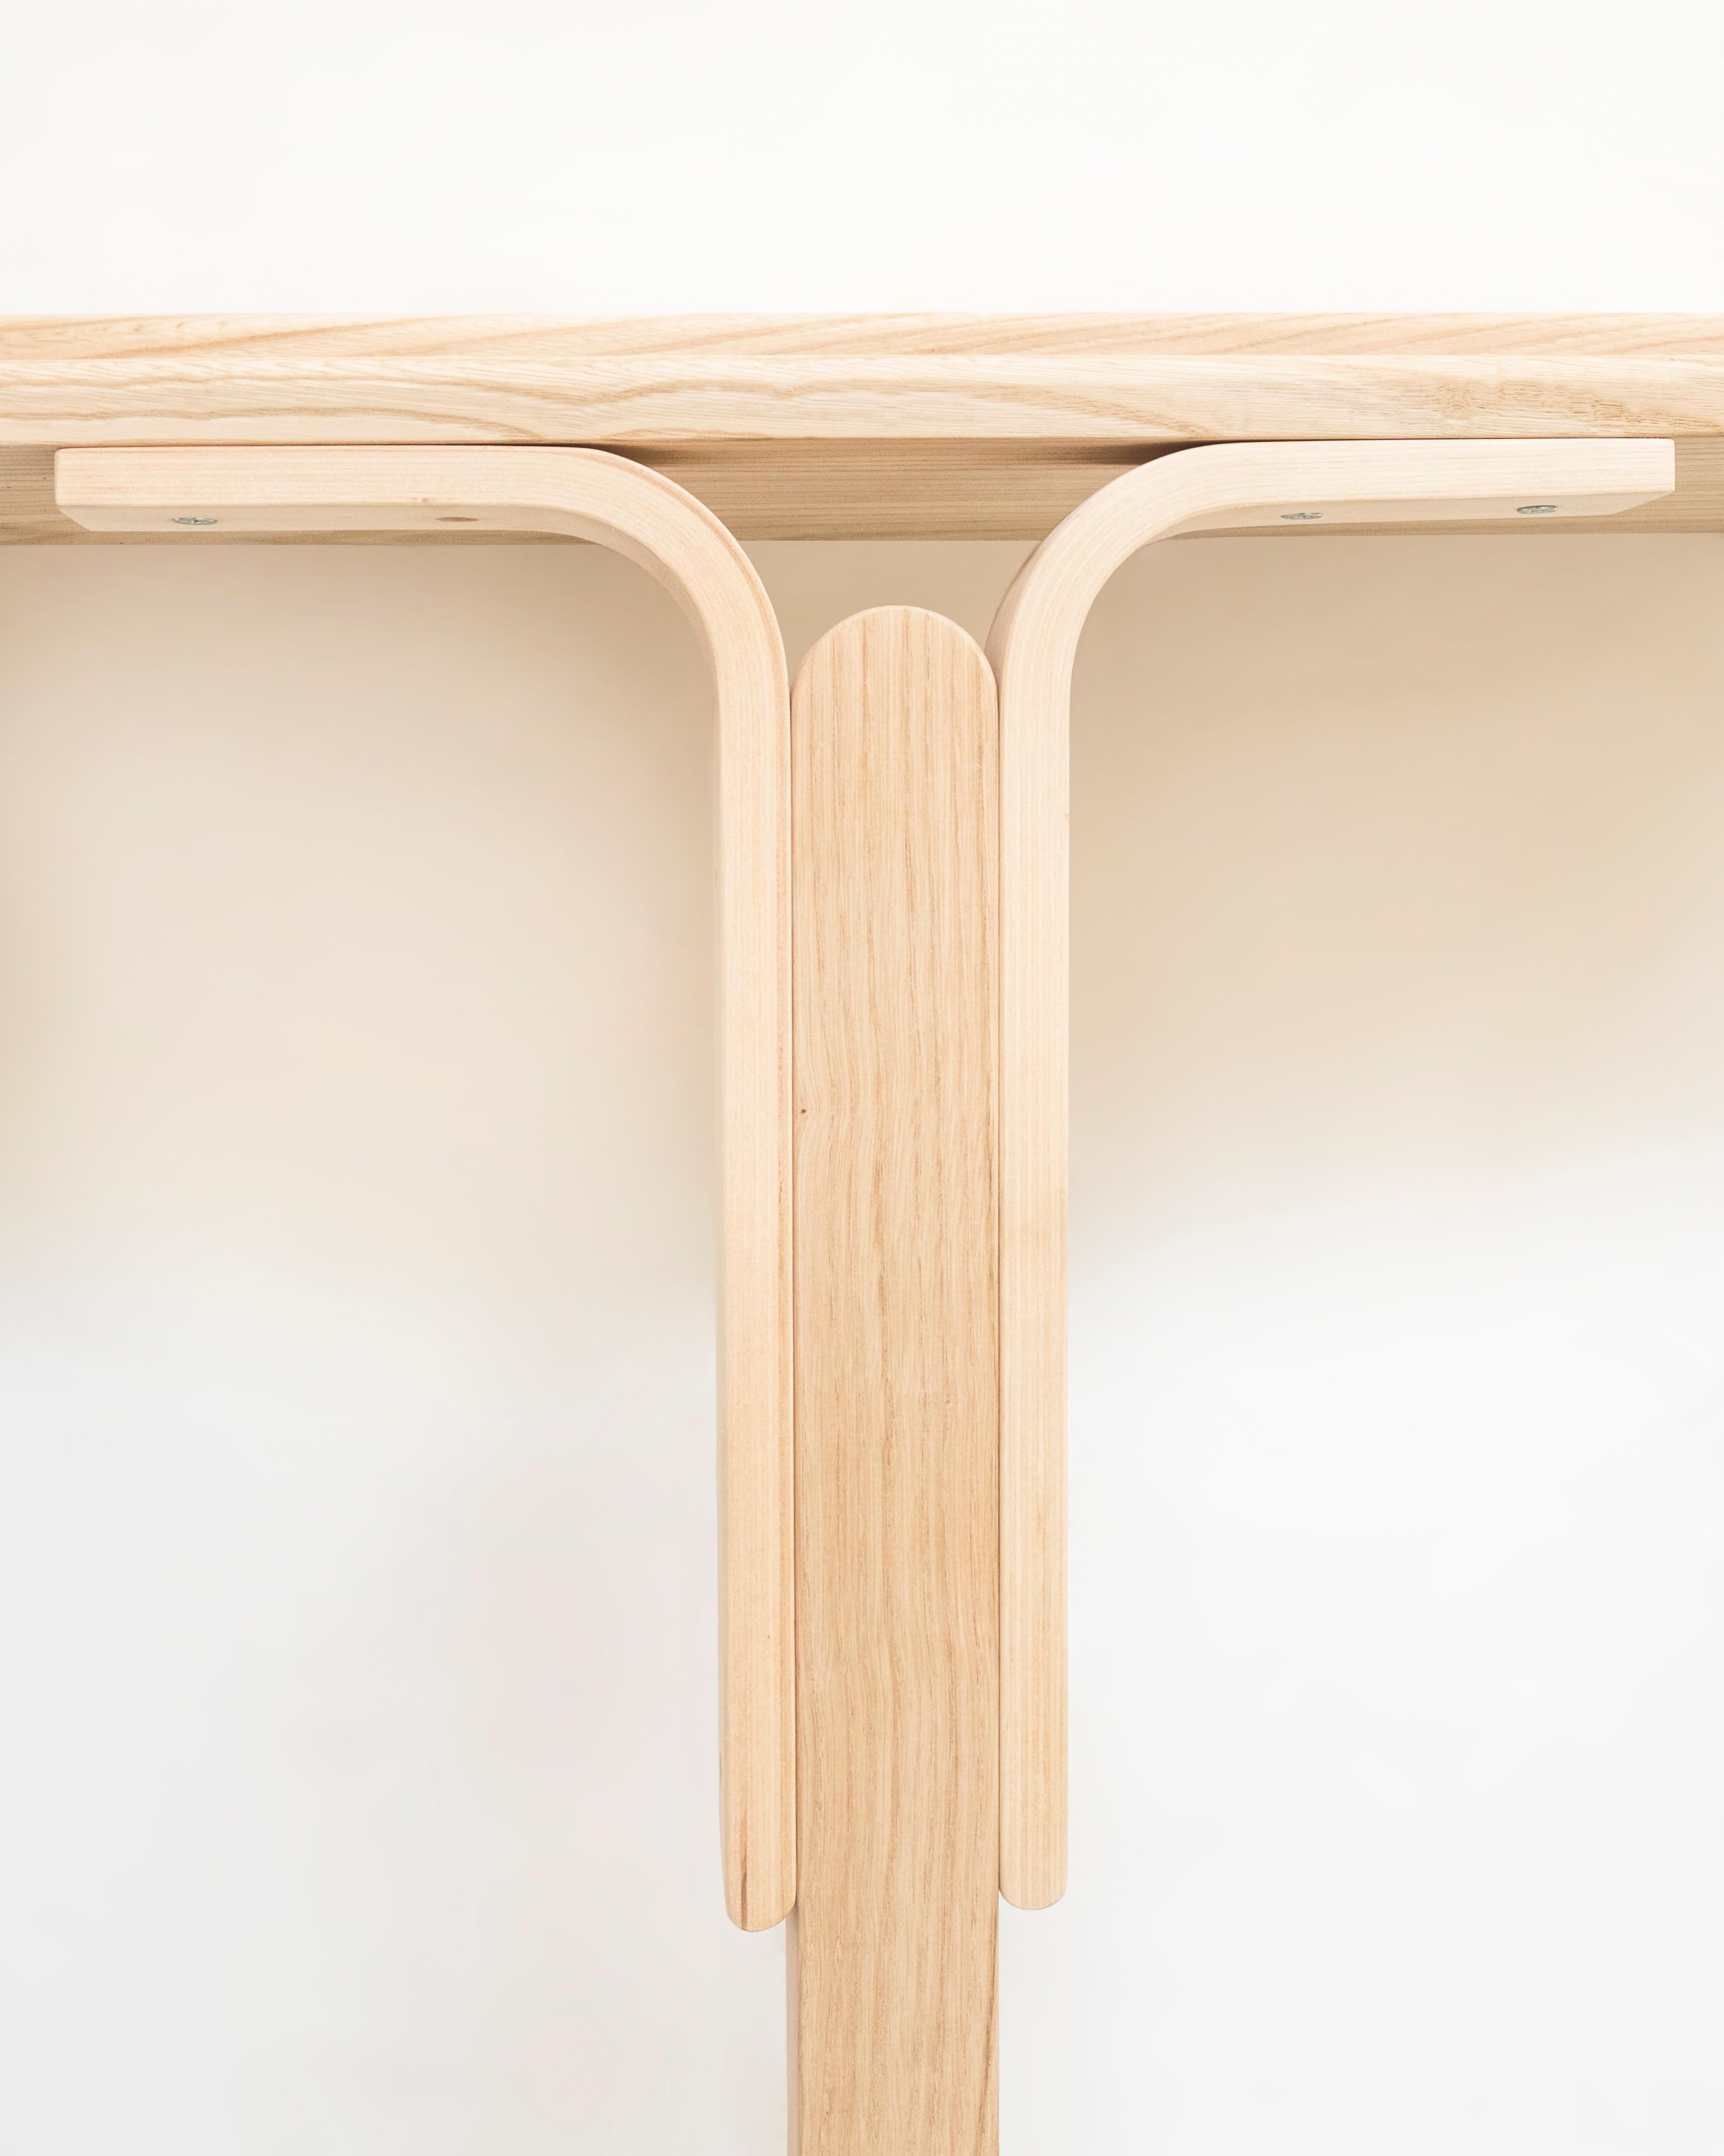 21st Century, Contemporary Wood Console Table Handmade in Italy by Ilabianchi (Italienisch) im Angebot